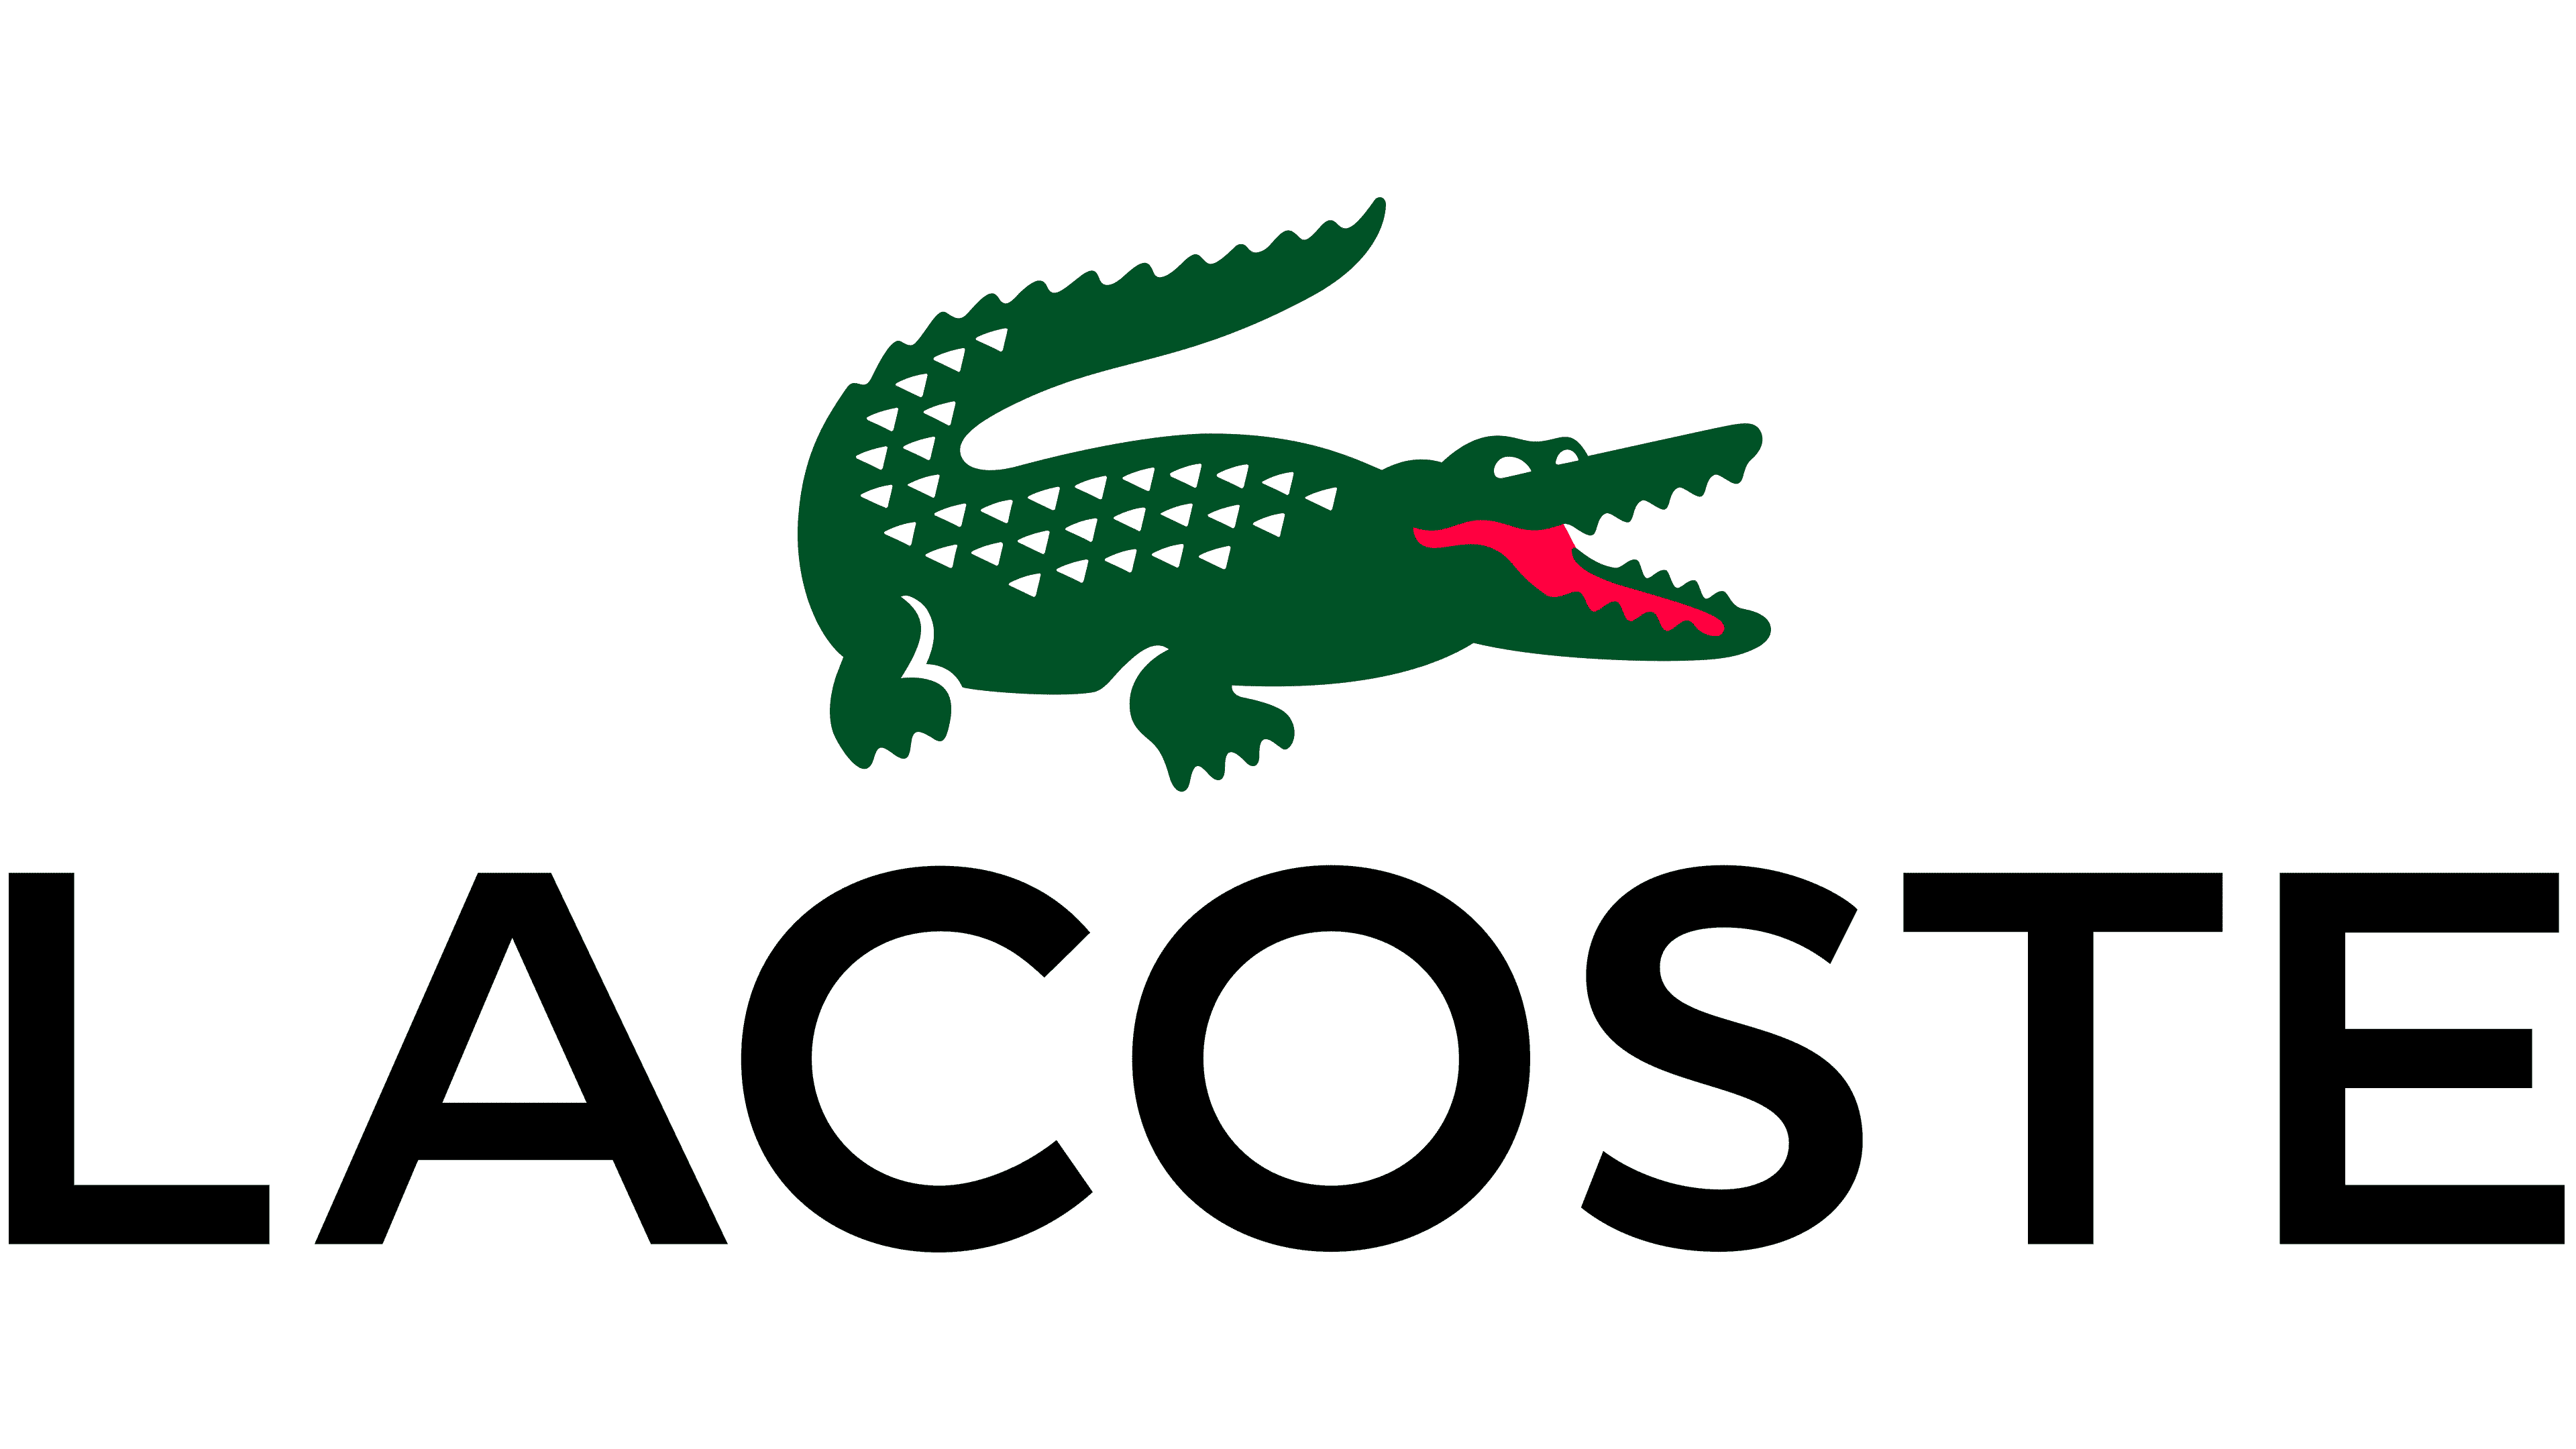 Join Le Club: Lacoste Clothing from Golfbase